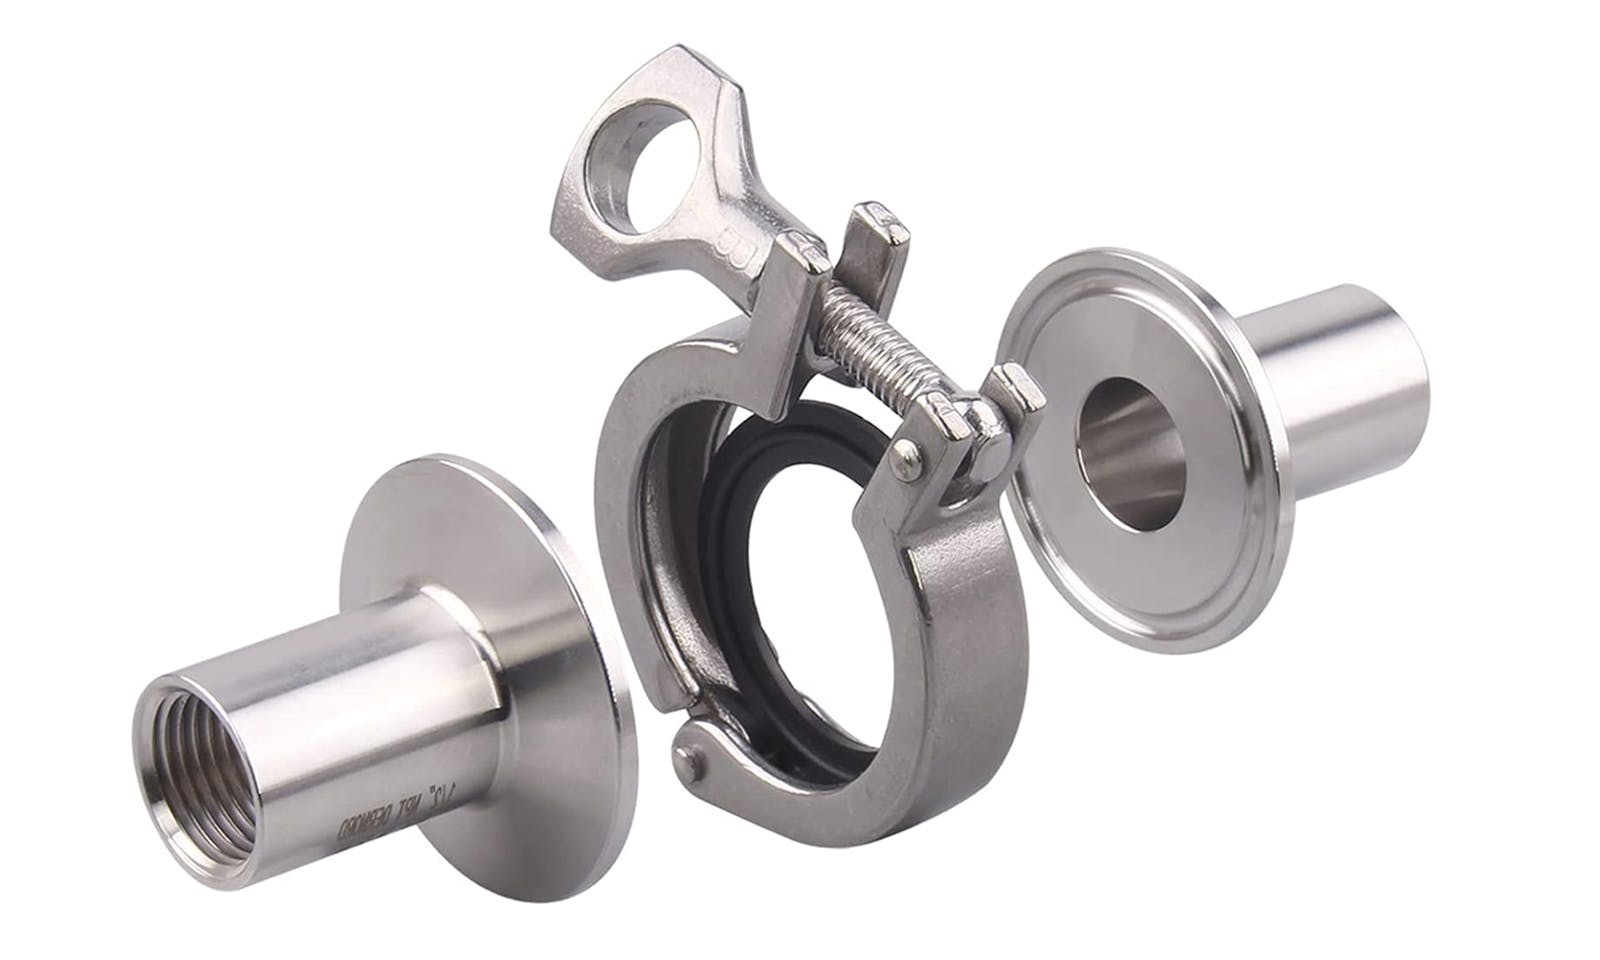 316 Stainless Sanitary Fittings